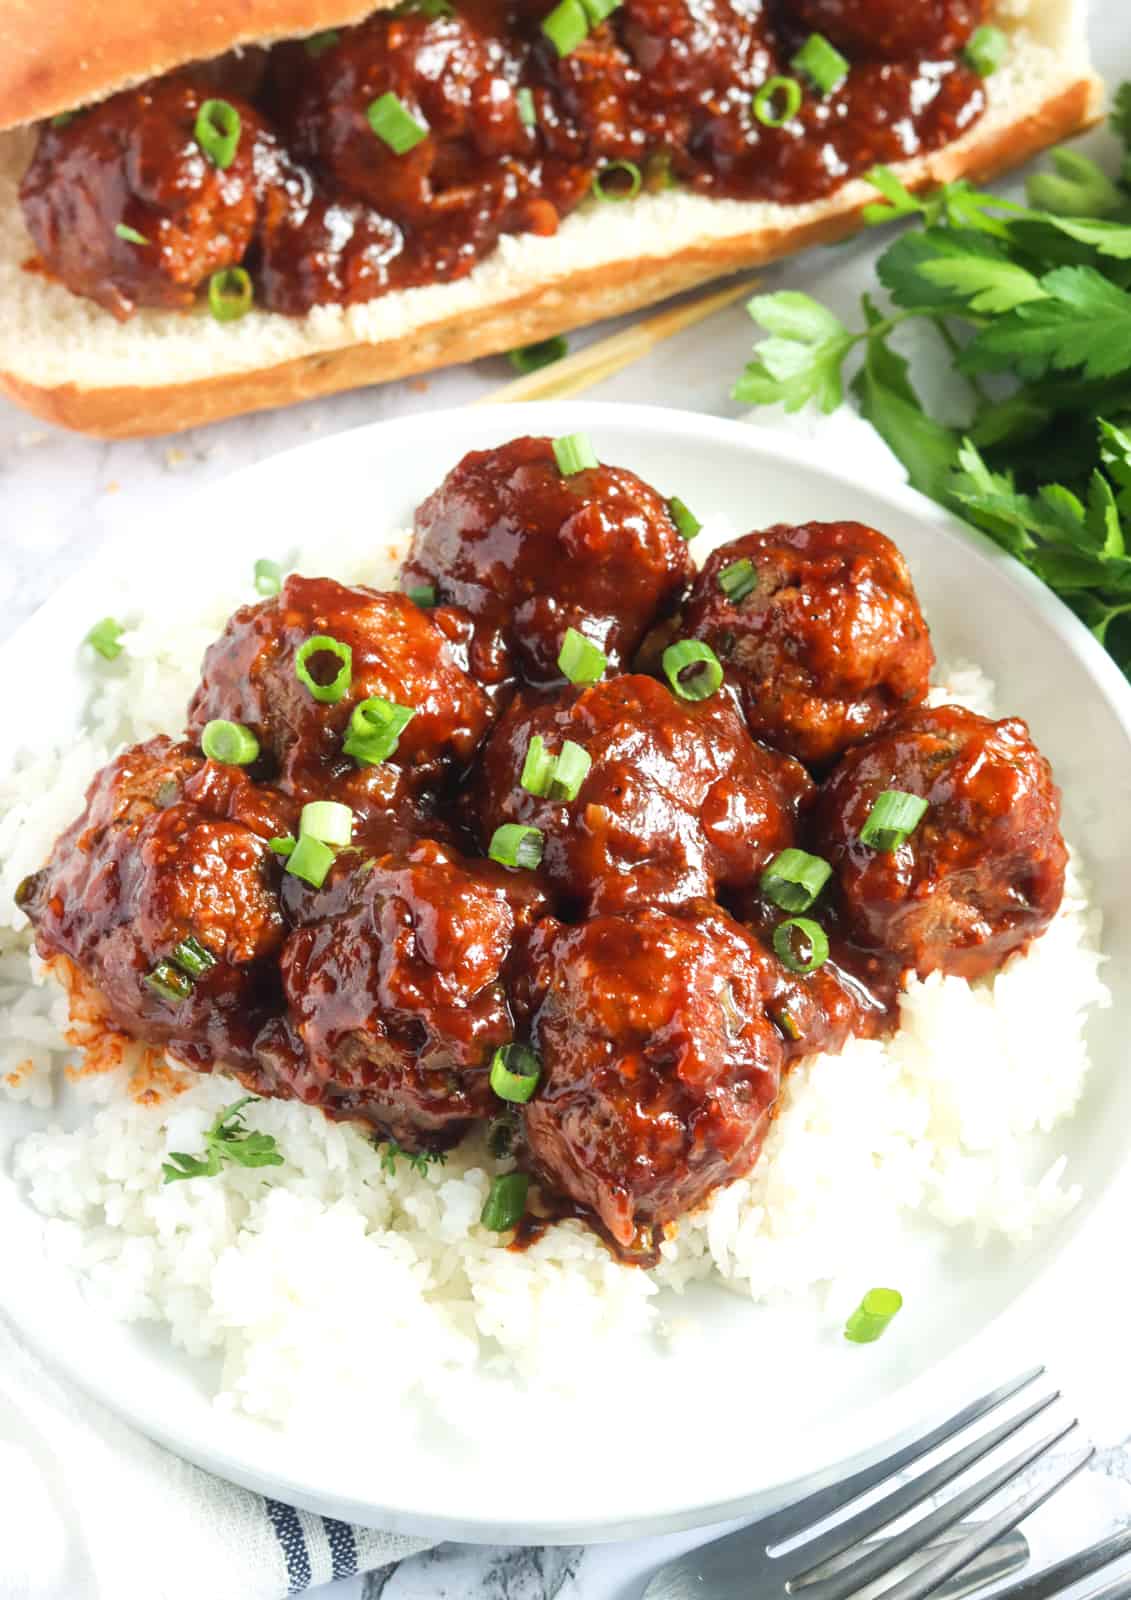 Absolutely delicious BBQ meatballs perfect over rice or in a sandwich